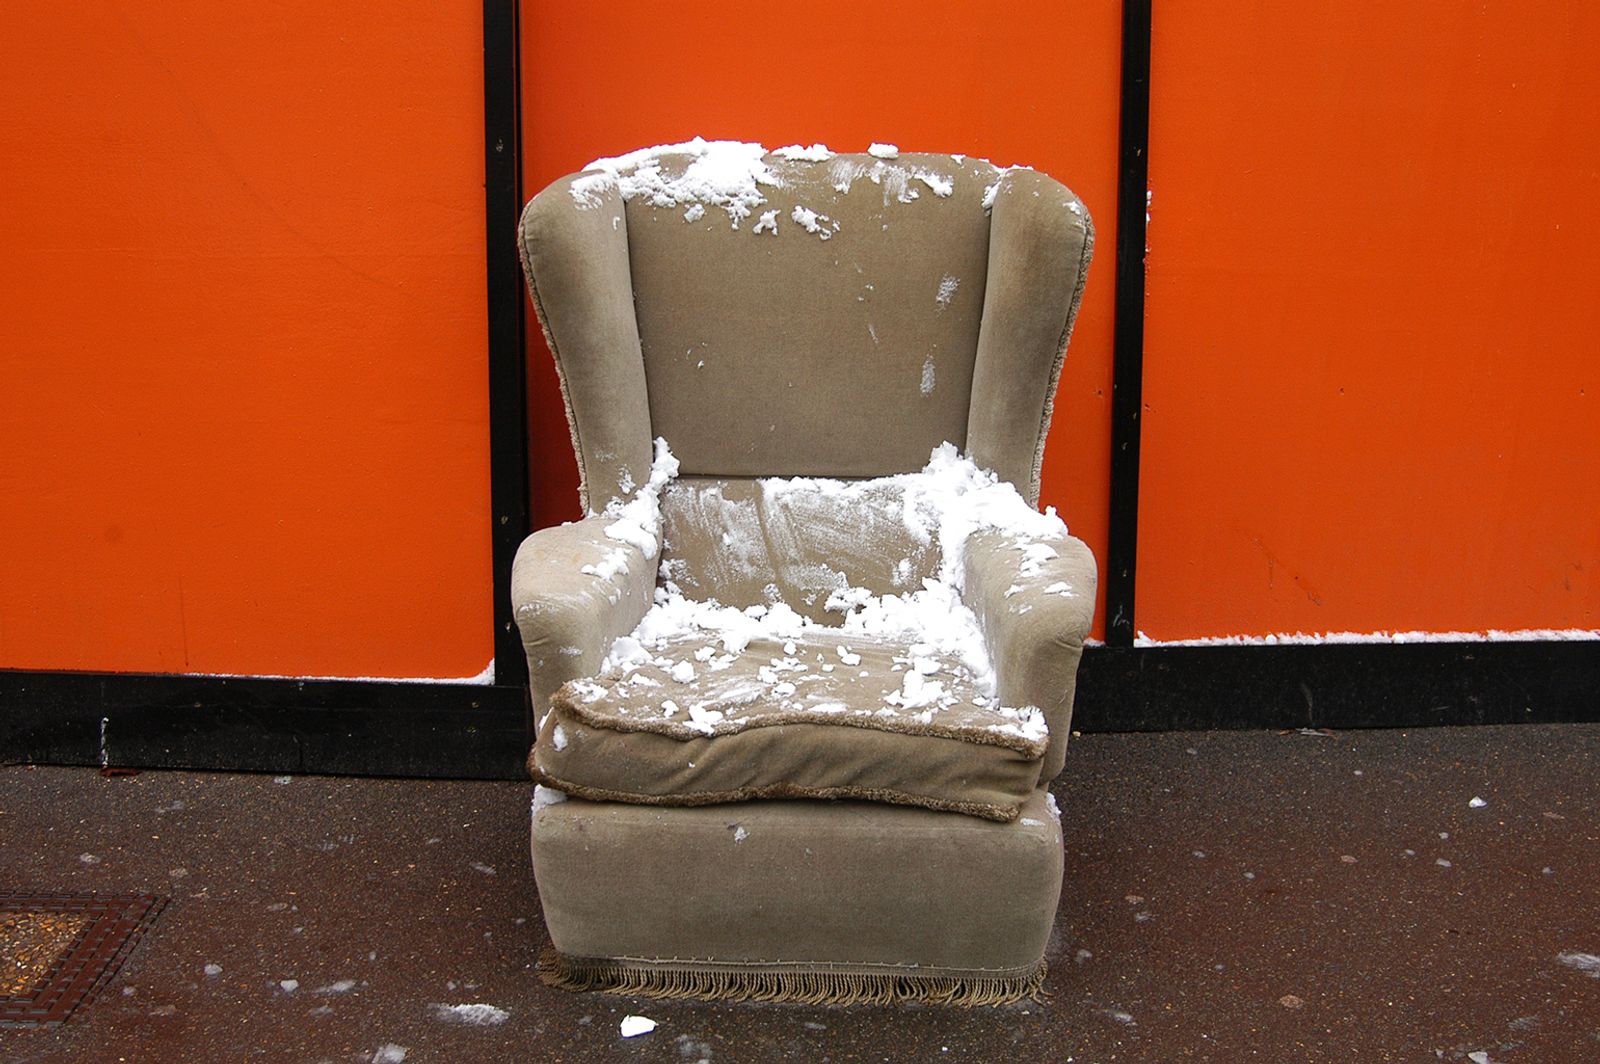 © Heather McDonough - snow on high backed chair